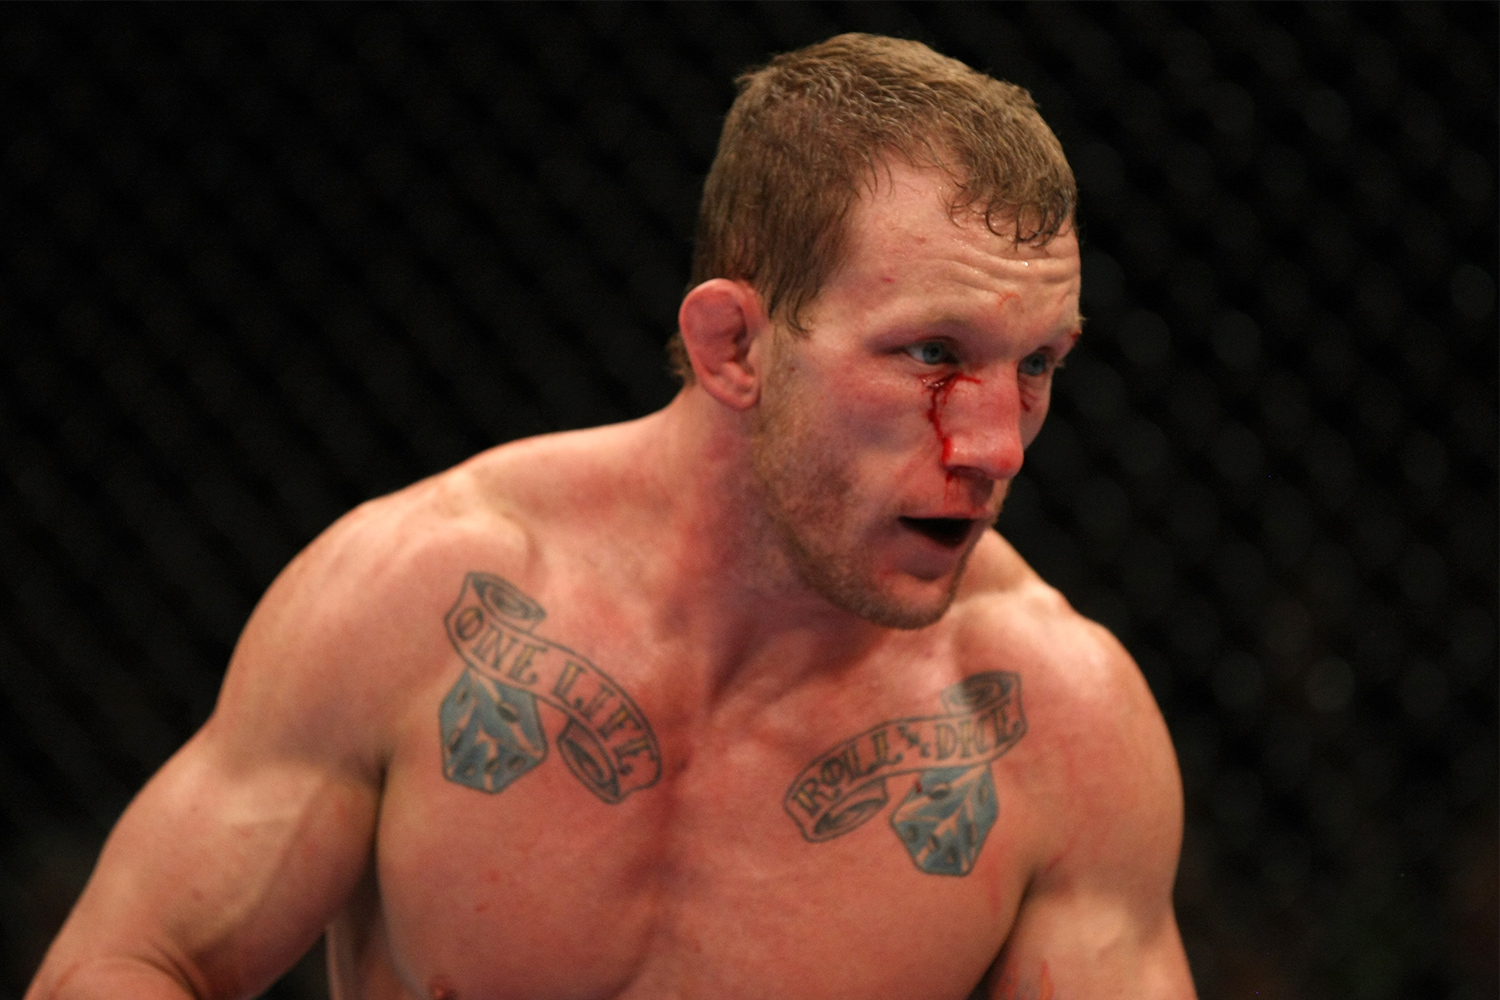 Gray Maynard at UFC 125 as he faced off against Frankie Edgar in the UFC lightweight championship. Maynard is now part of an antitrust lawsuit against the UFC.